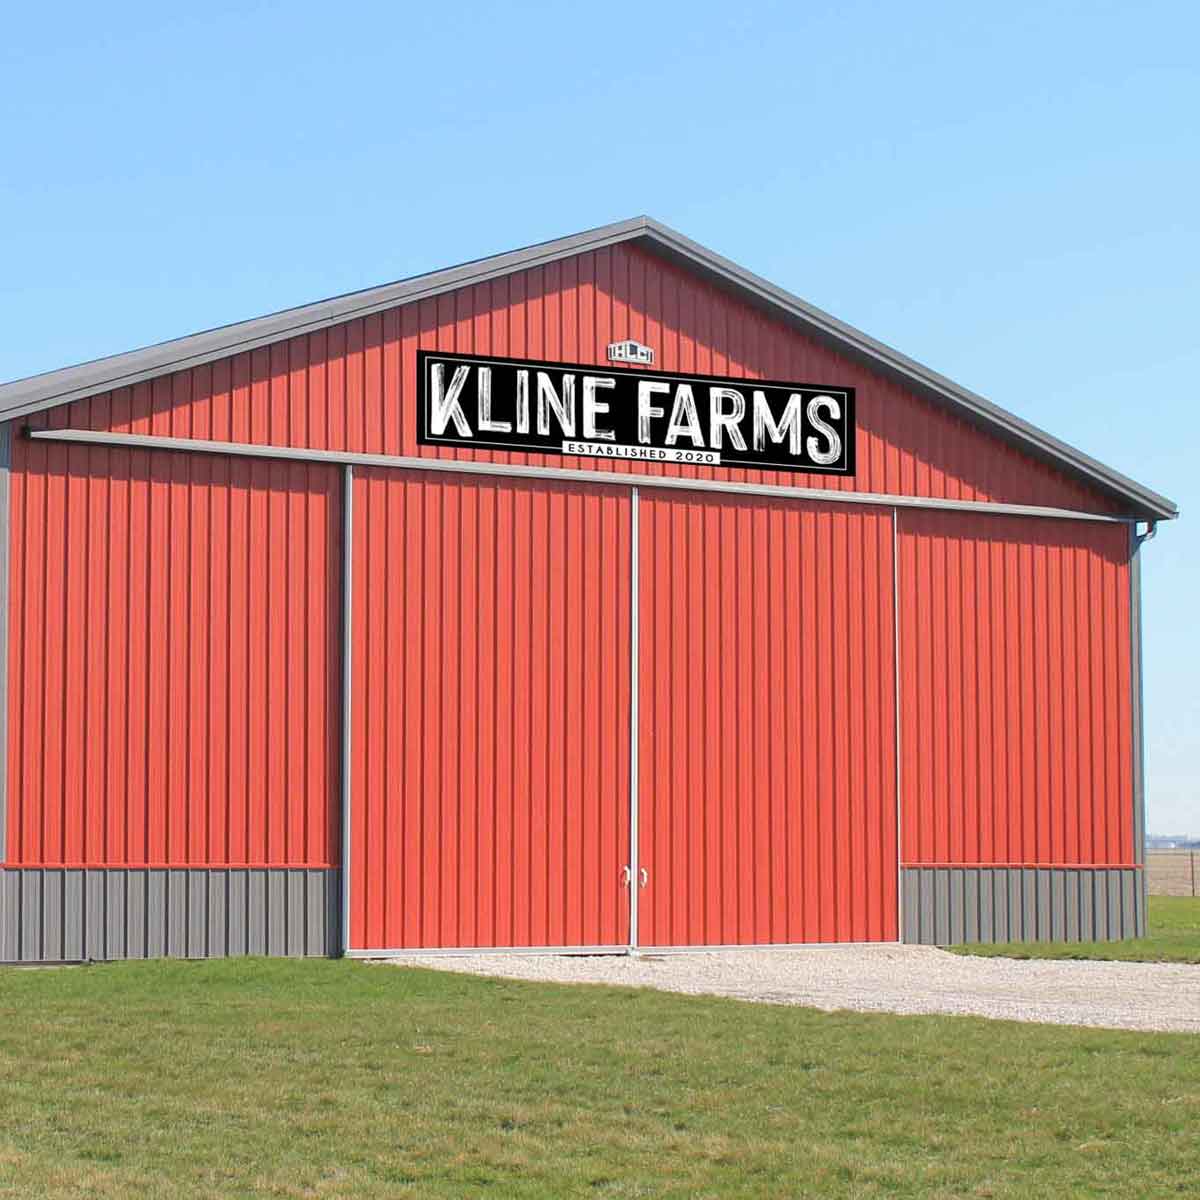 Personalized Barn Signs, Large Barn Signs with a modern font on black metal